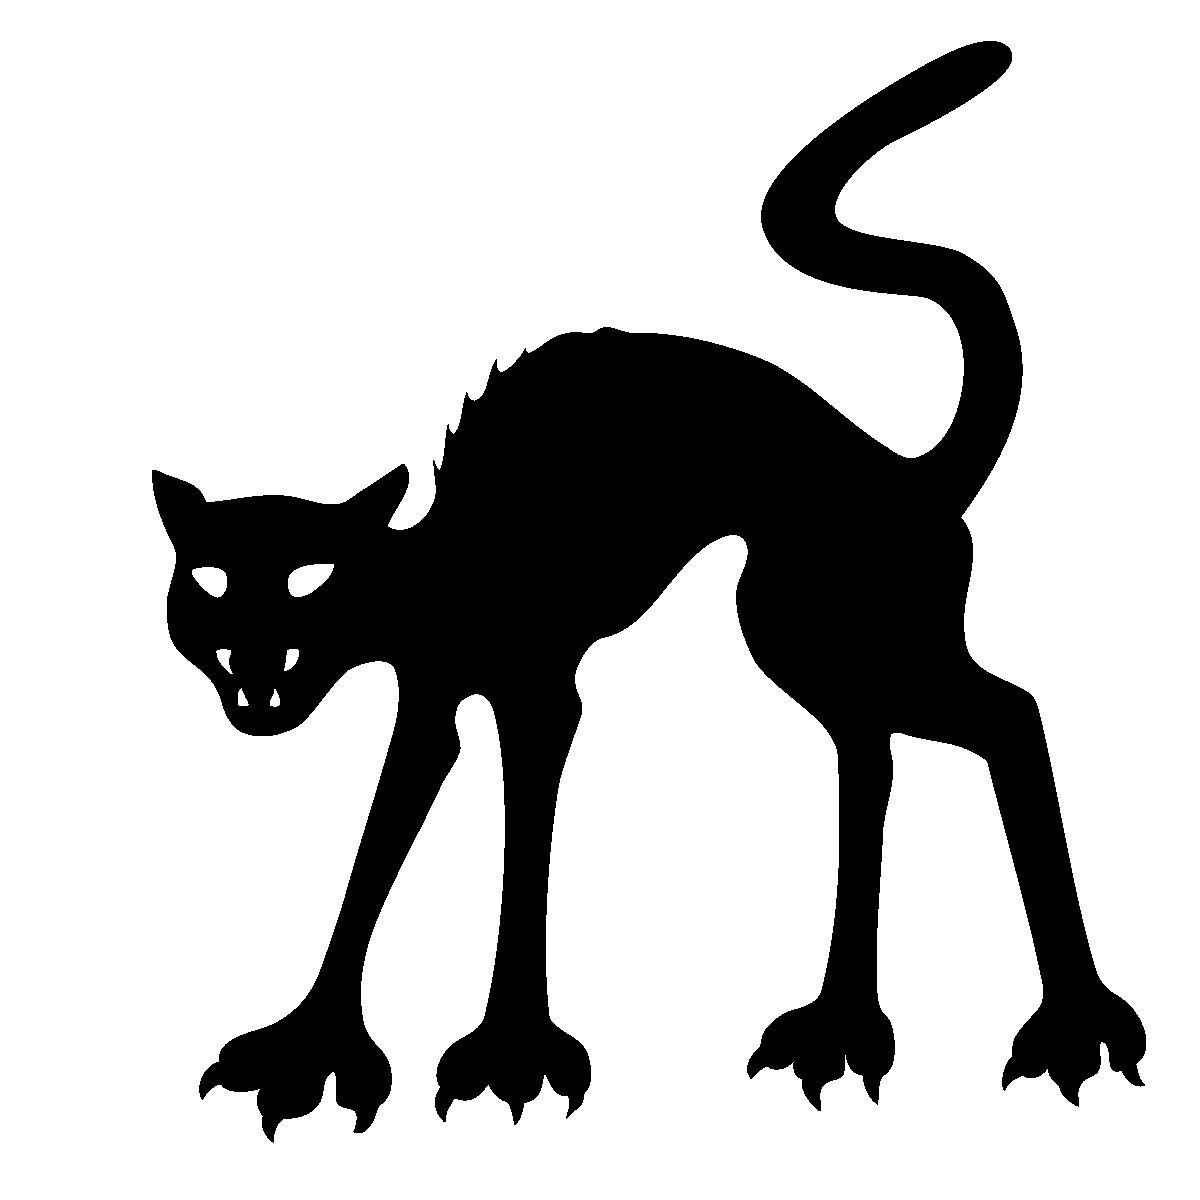 Free Scary Halloween Cat, Download Free Clip Art, Free Clip